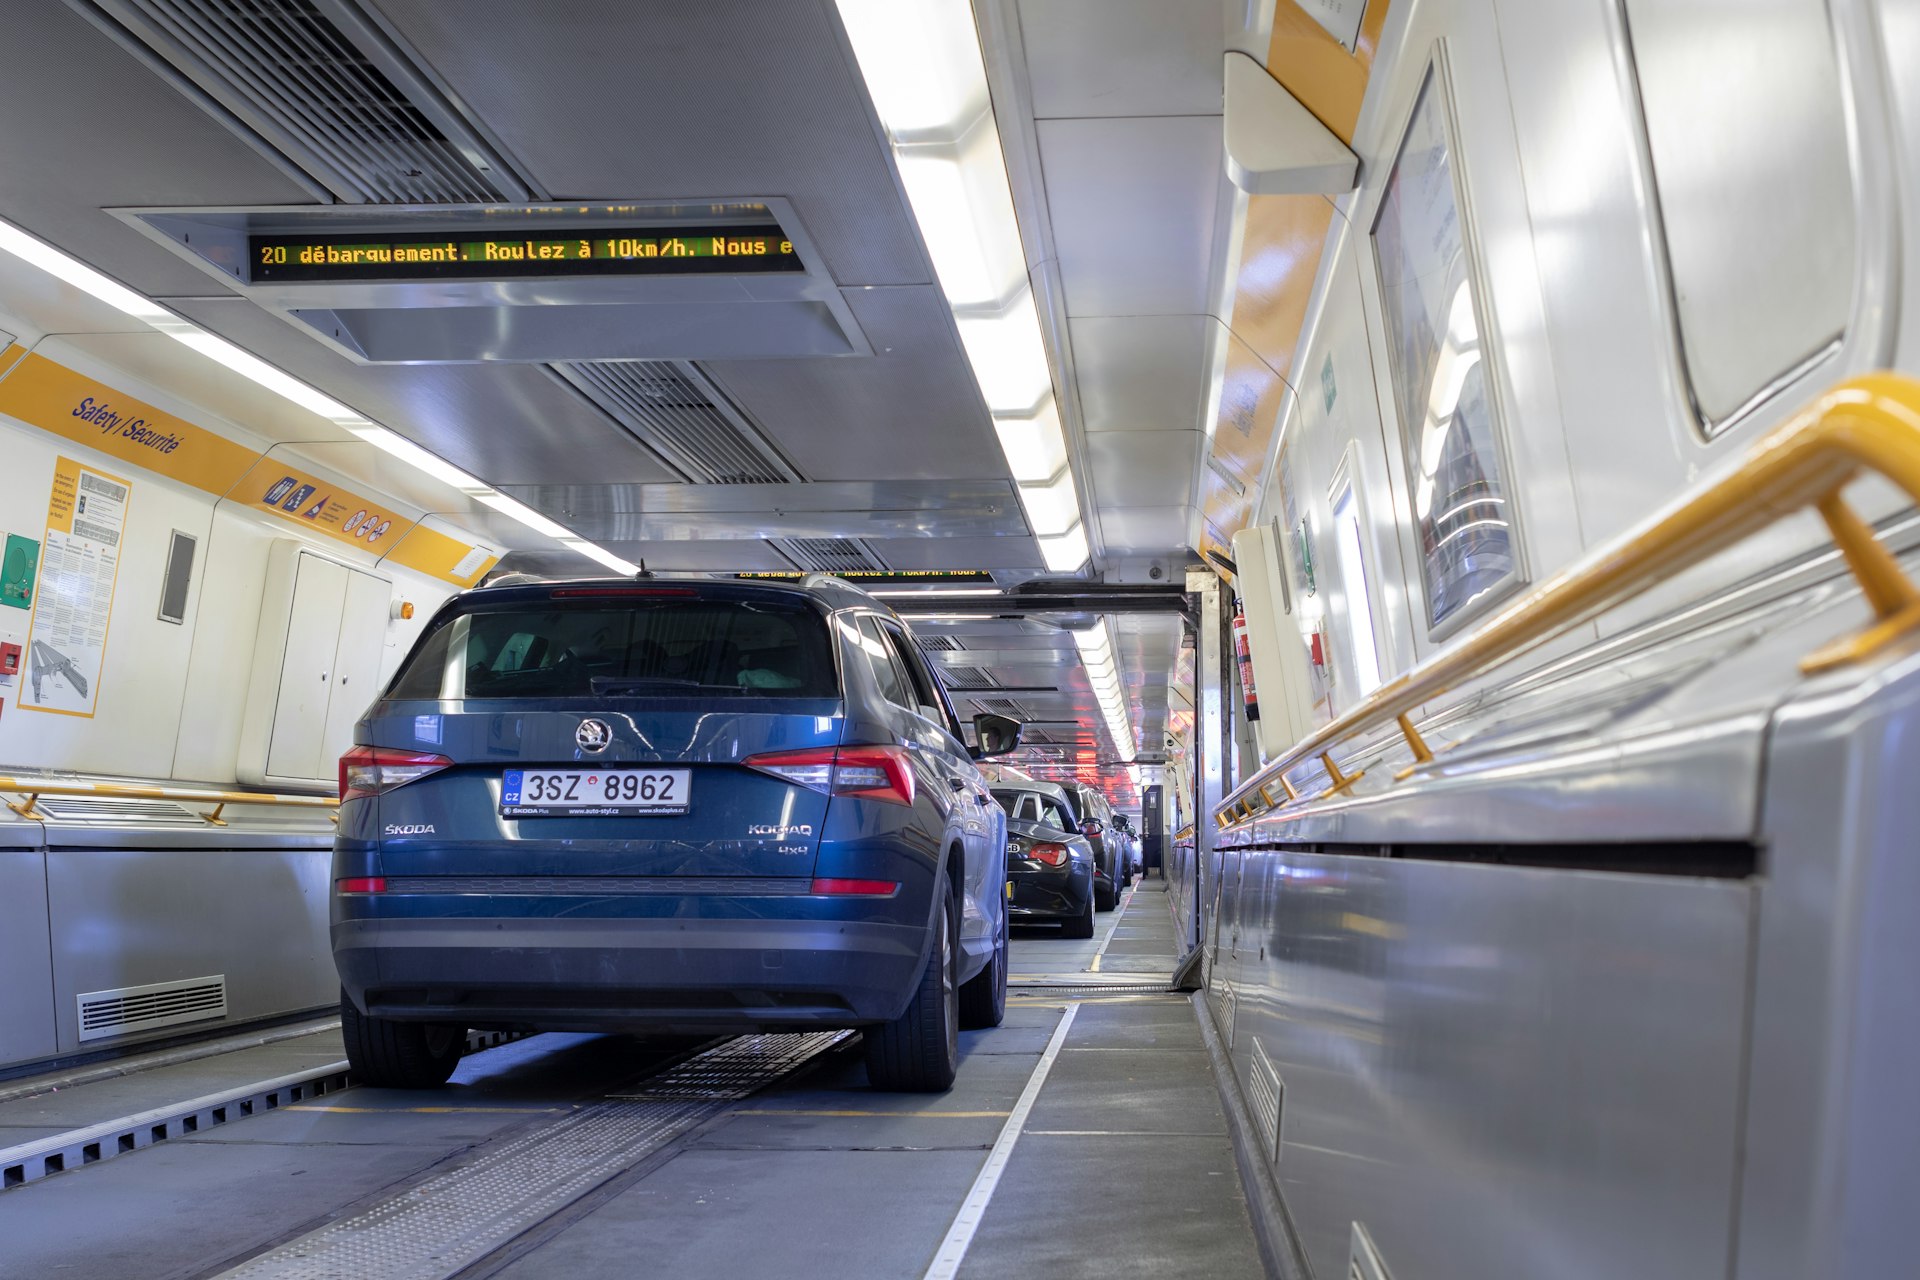 Cars lined up bumper to bumper inside a Eurotunnel train